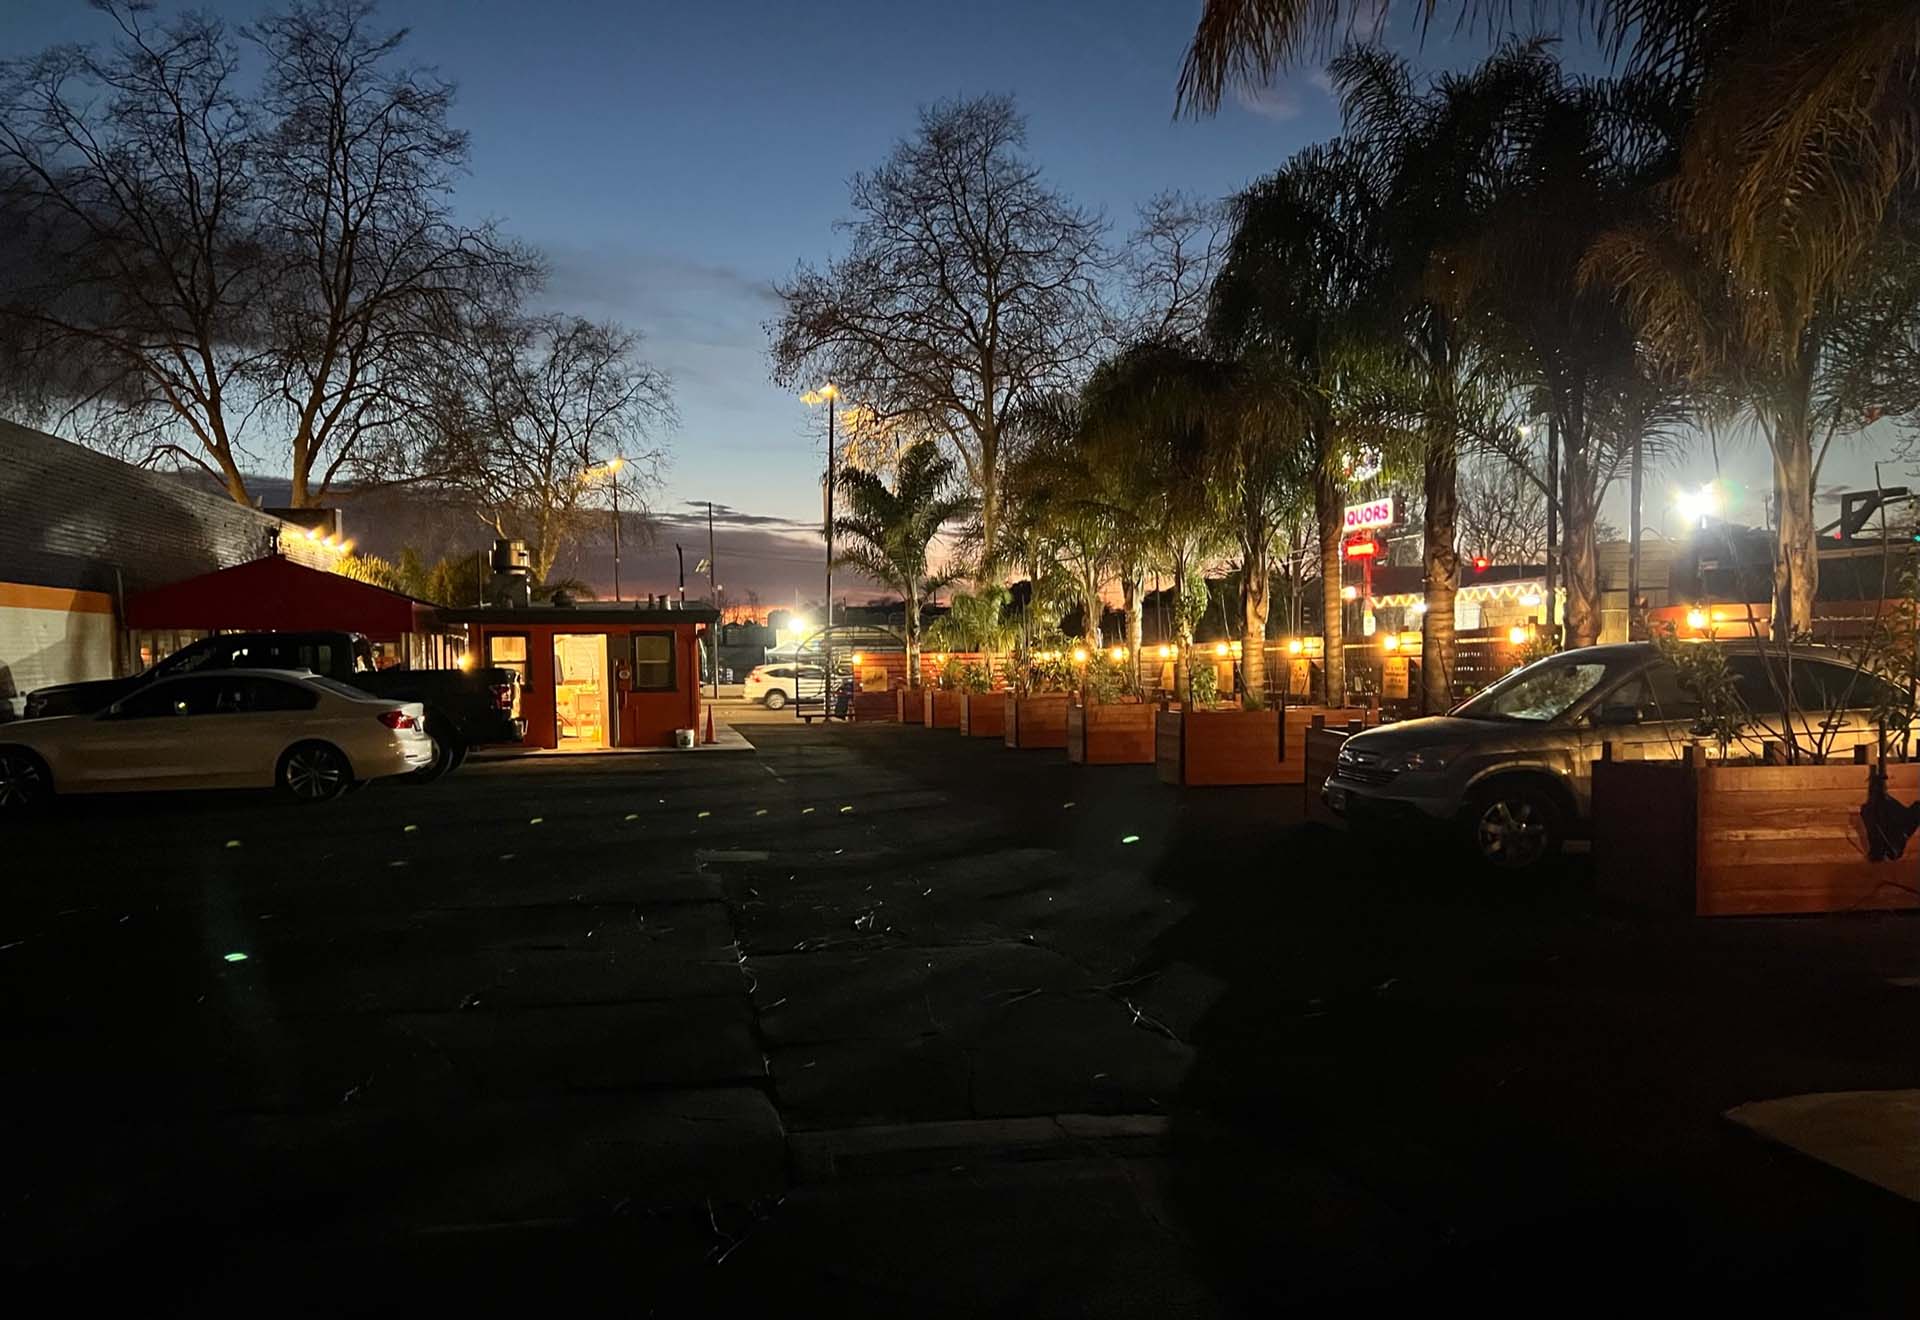 A restaurant's palm tree–lined parking lot and outdoor dining area lit up at night.